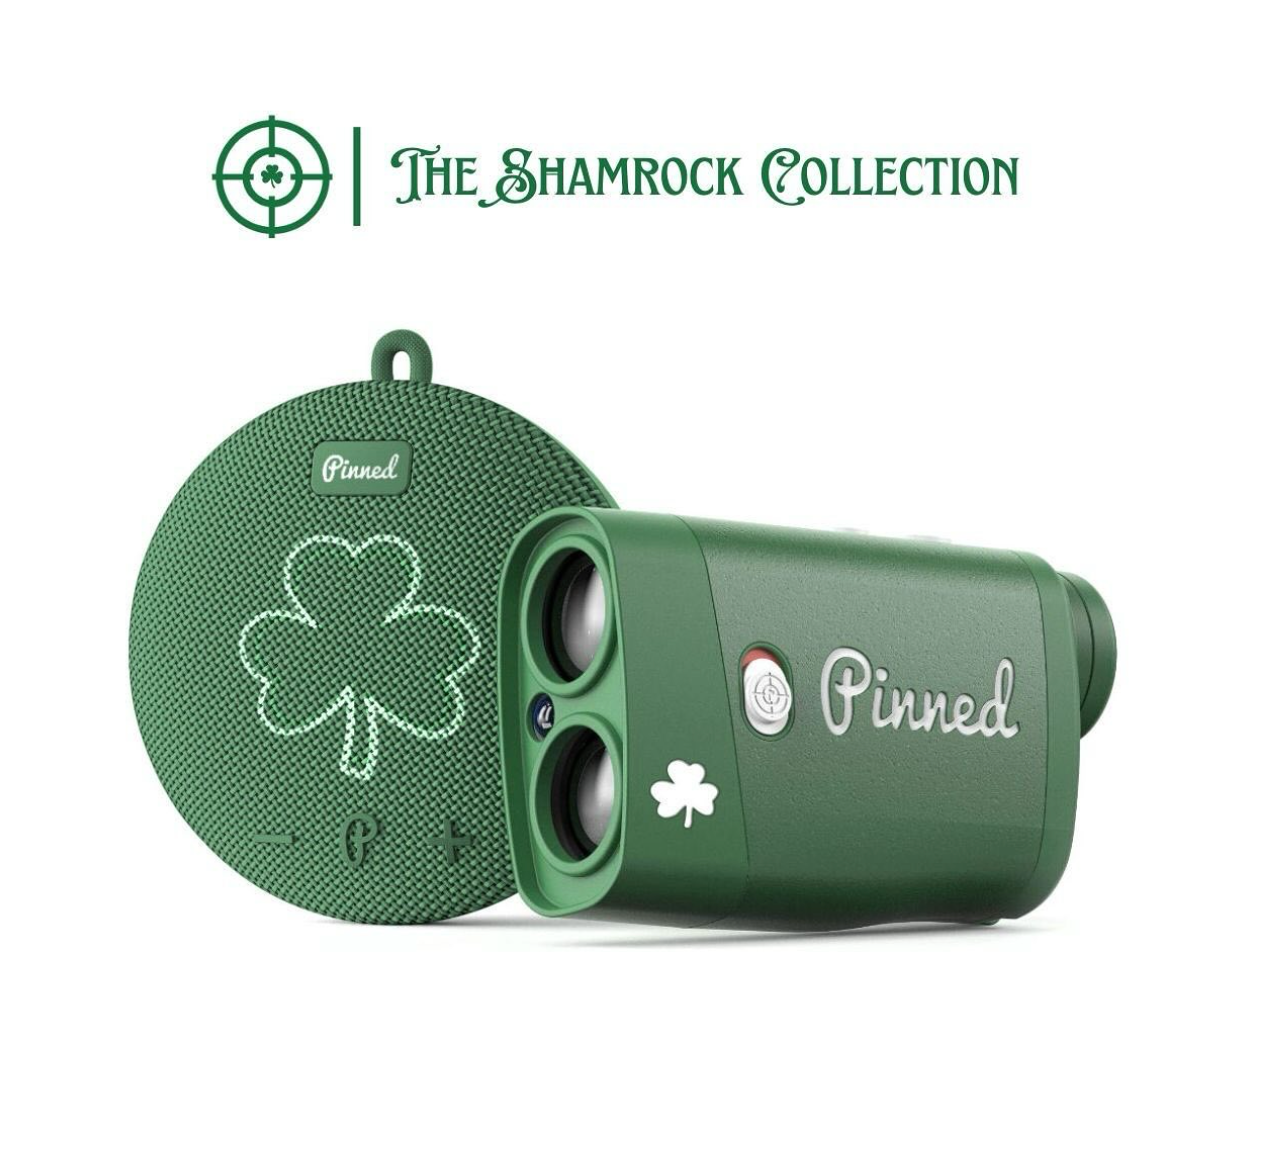 The Shamrock Collection! ☘️